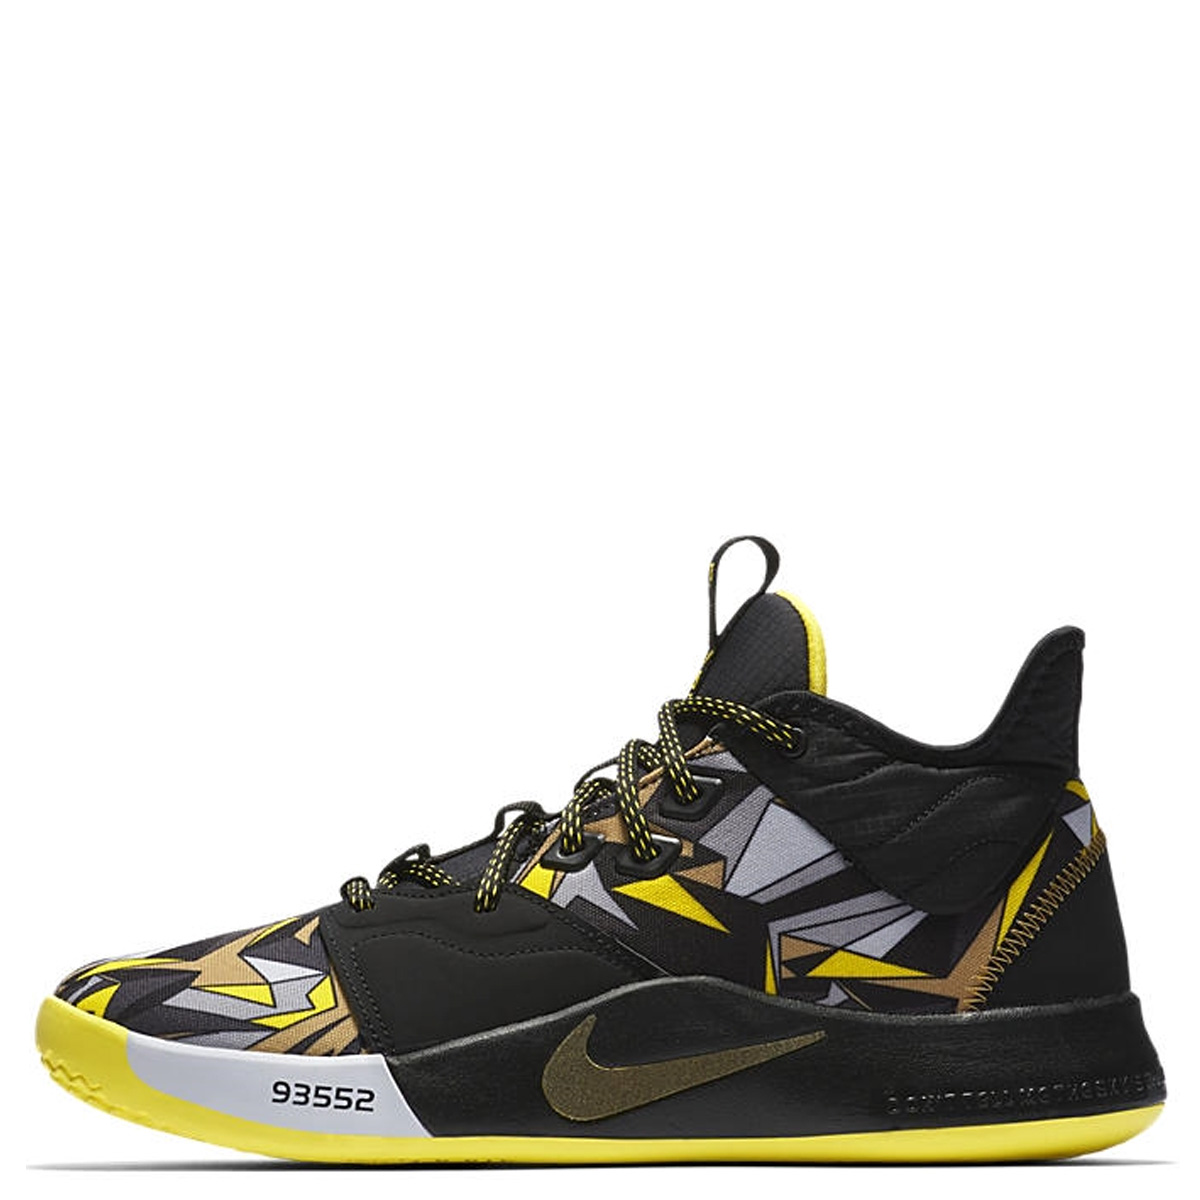 pg 3 yellow and black